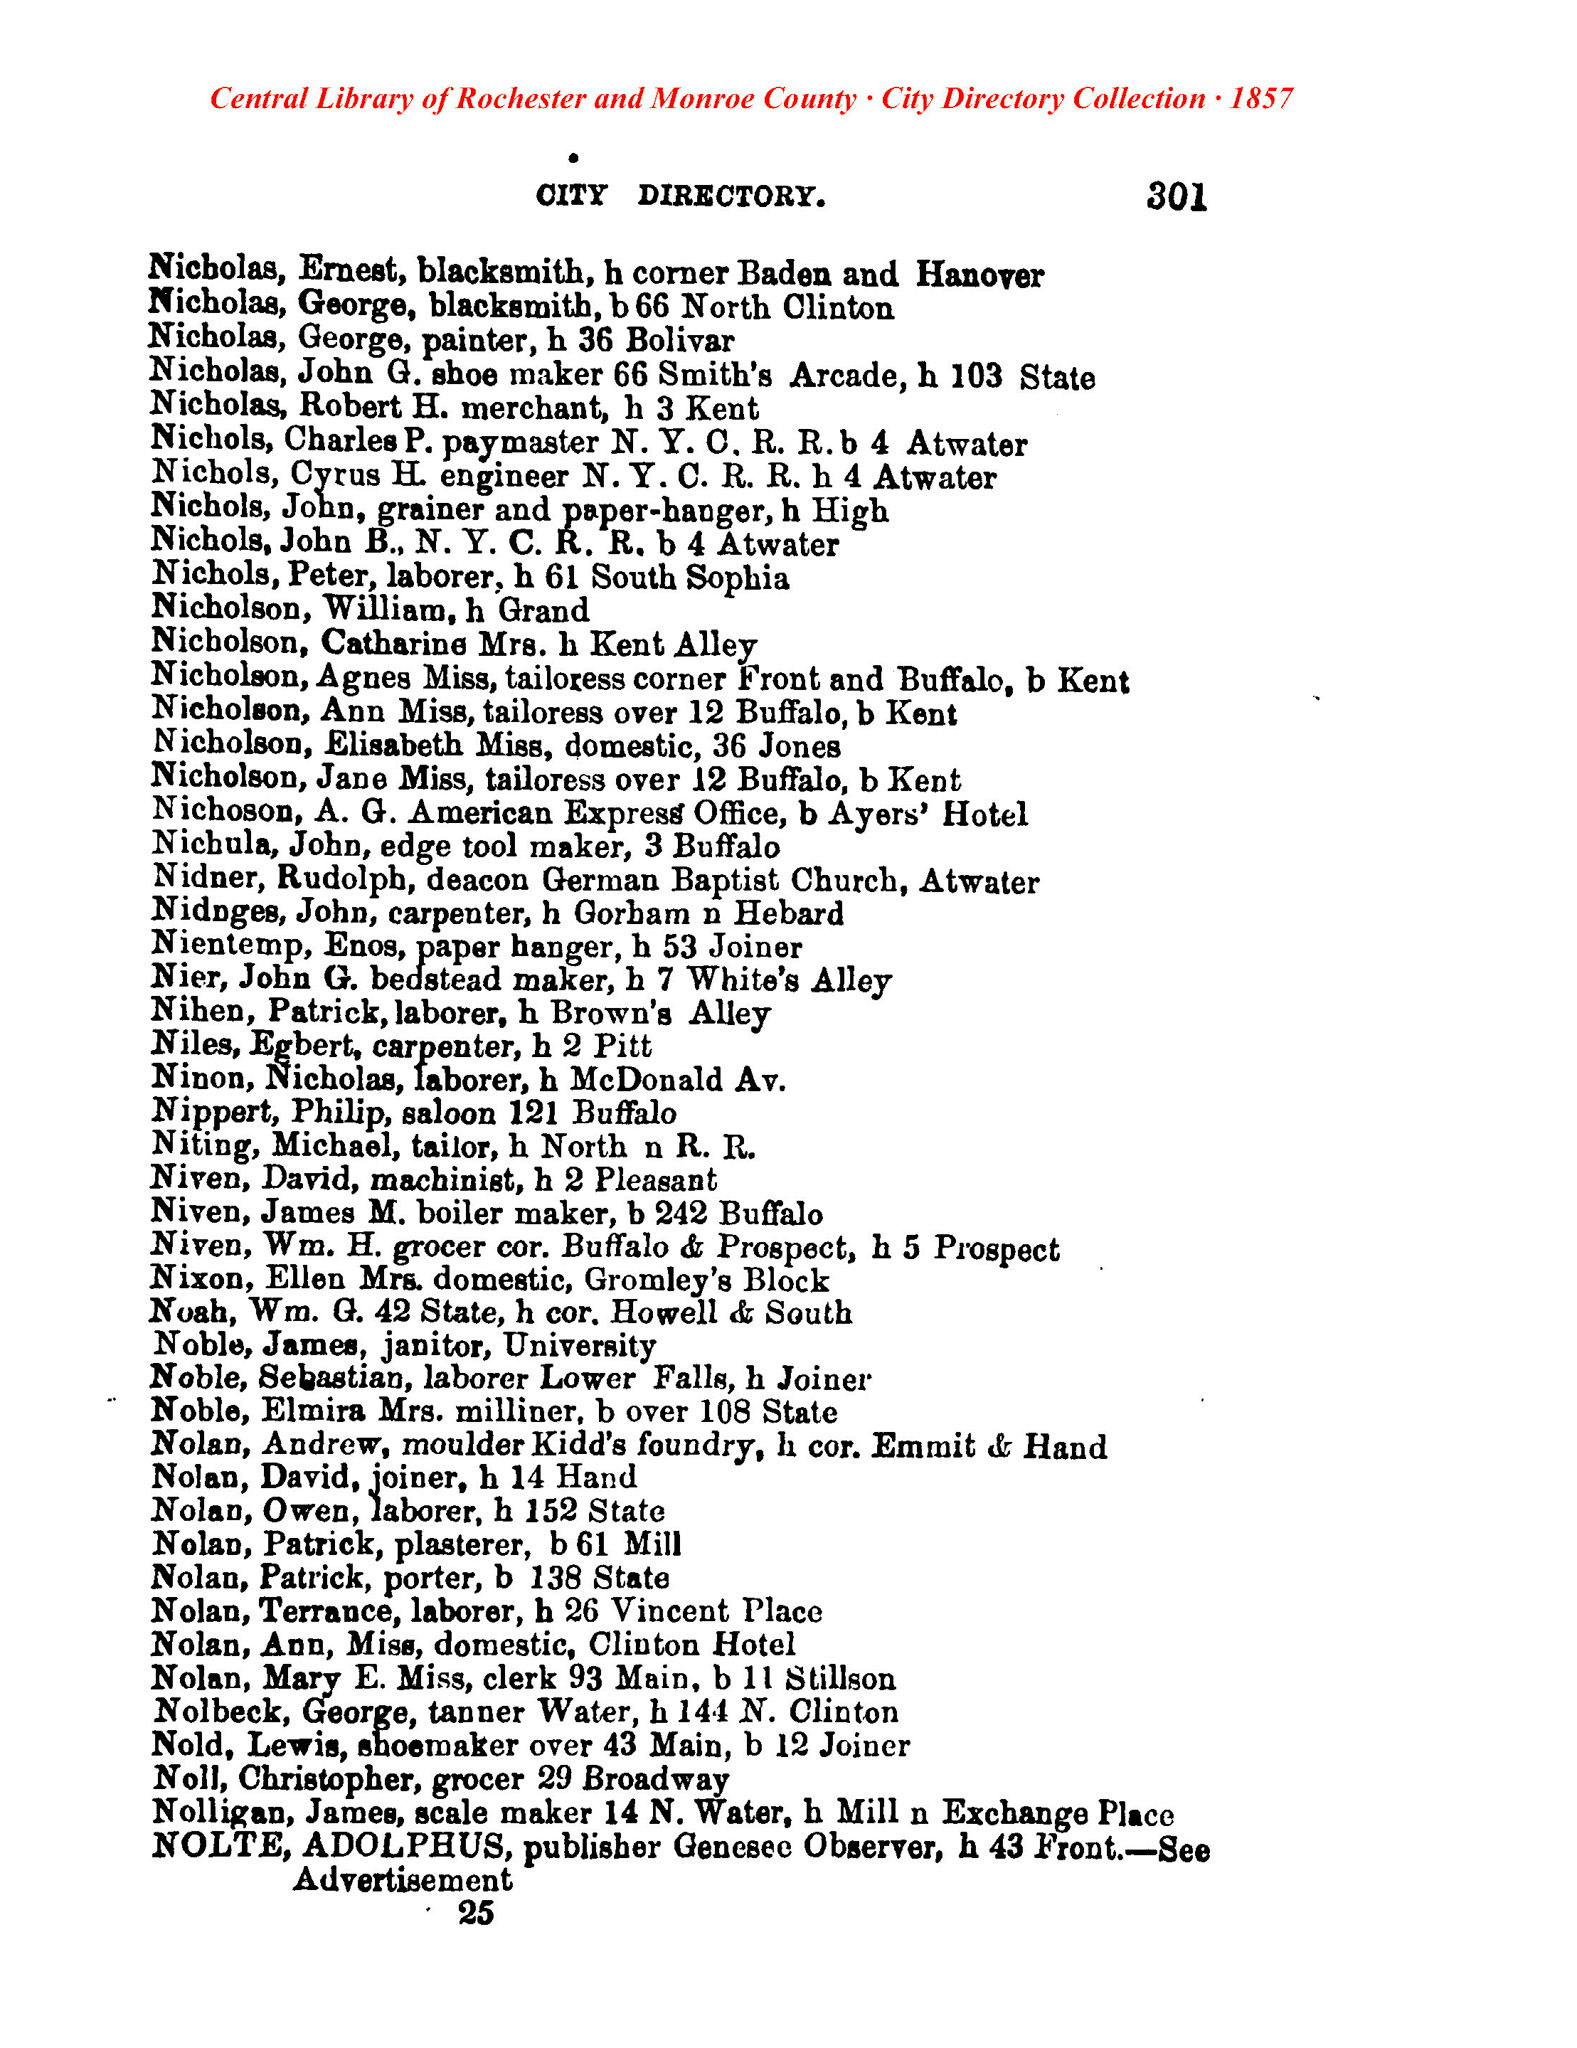 1857 Rochester City Guide for Ernest Nicholas